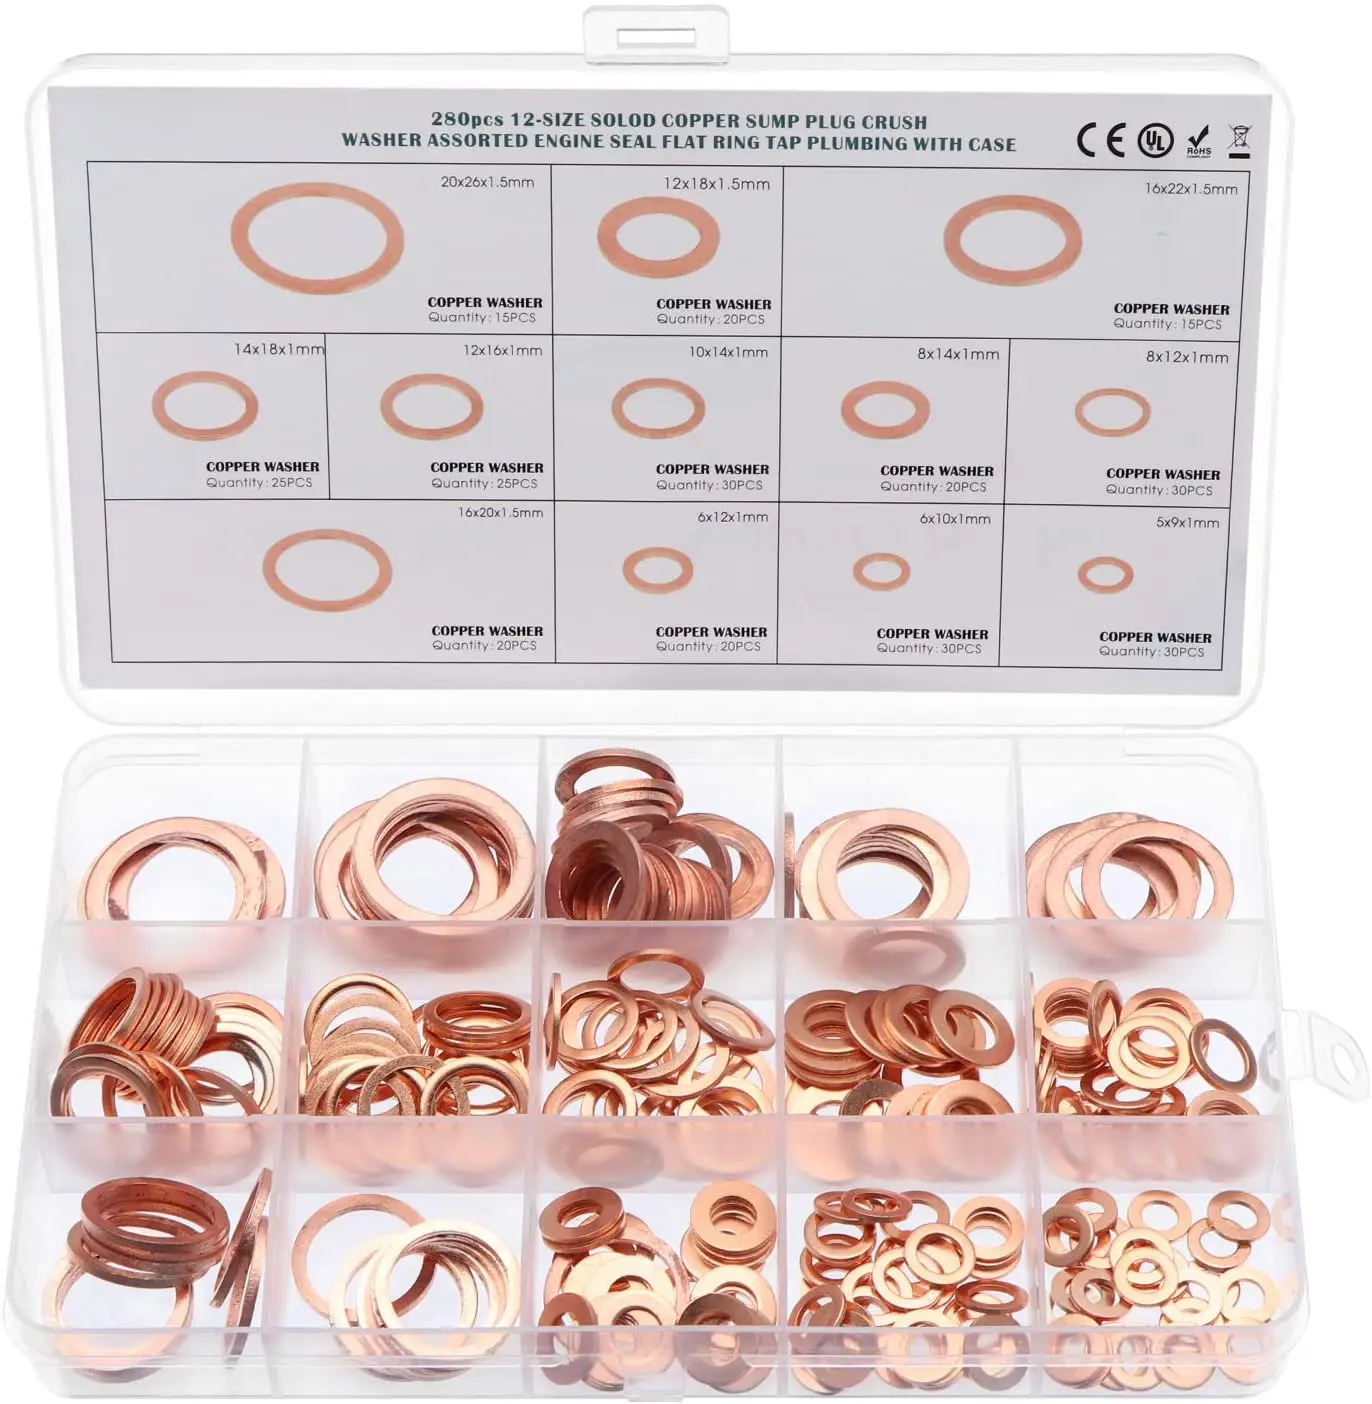 280PCS Assorted Solid Copper Car Engine Crush Washers Seal Flat Ring Gasket Set 